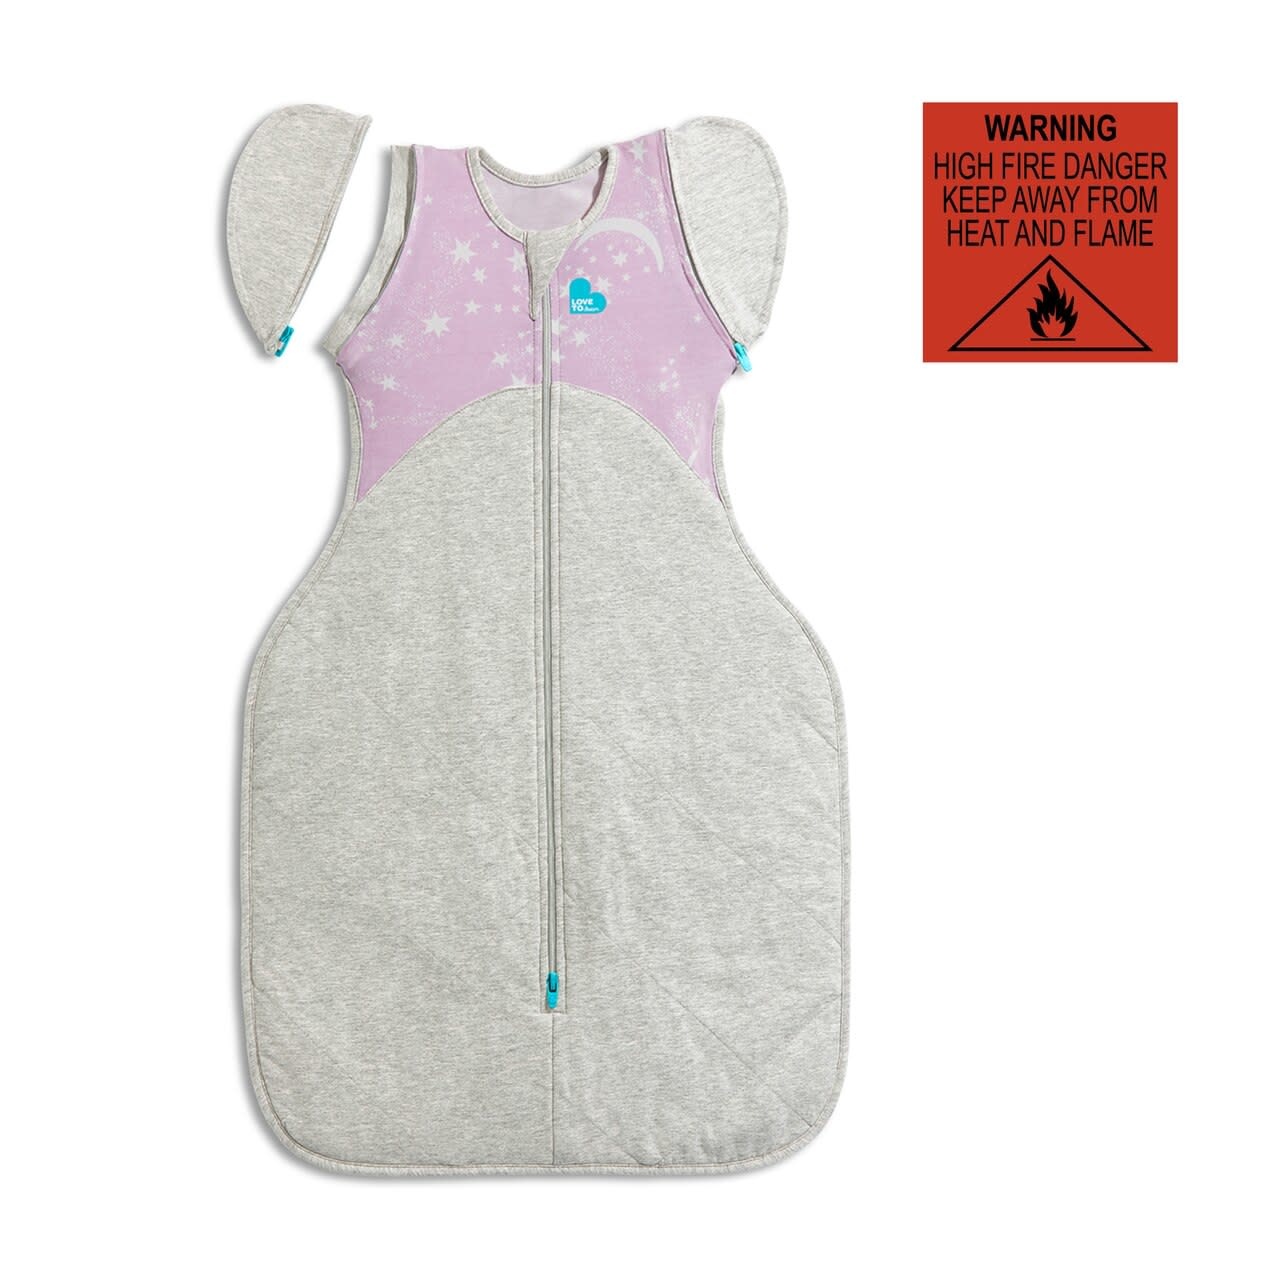 Love To Dream Love To Dream Swaddle Up Transition Bag Warm 2.5Tog